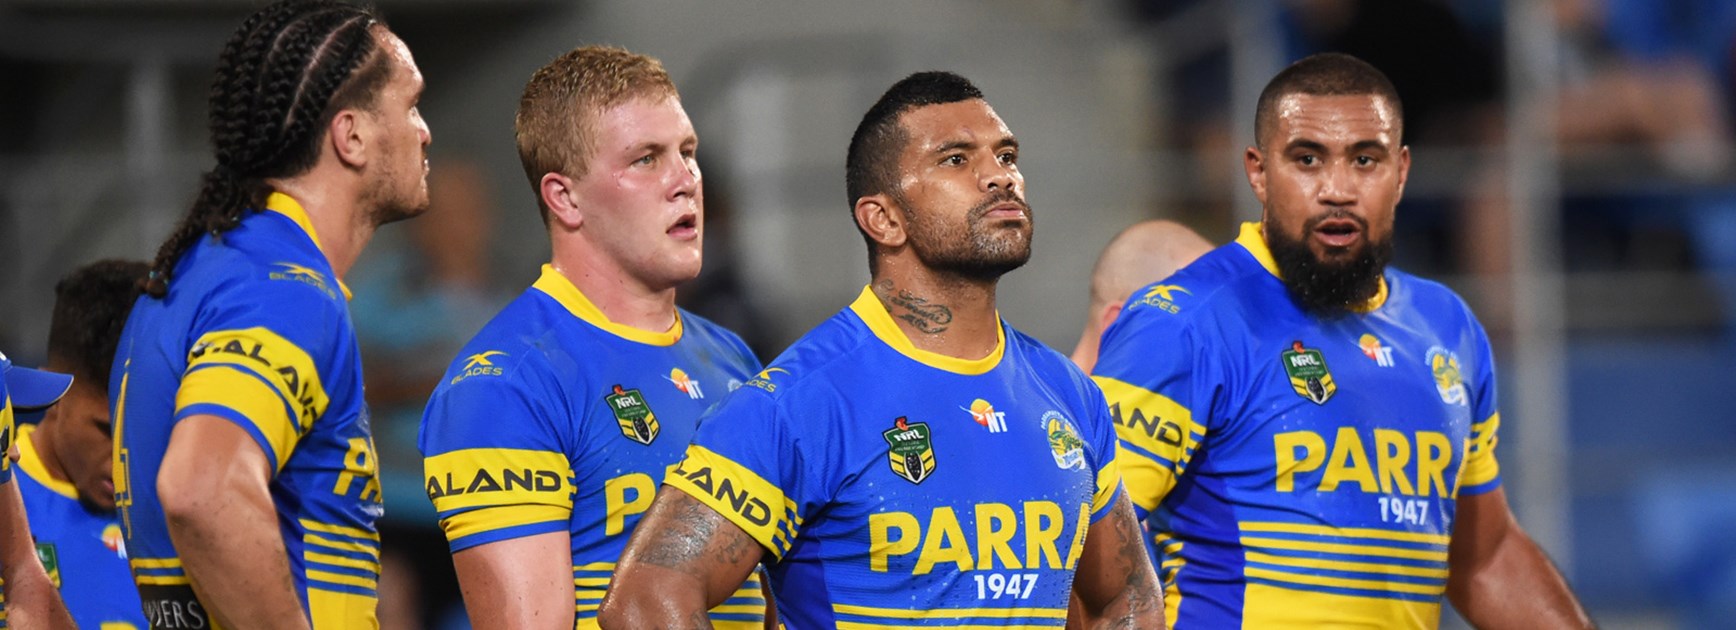 Parramatta Eels players during their Round 3 loss to the Titans.